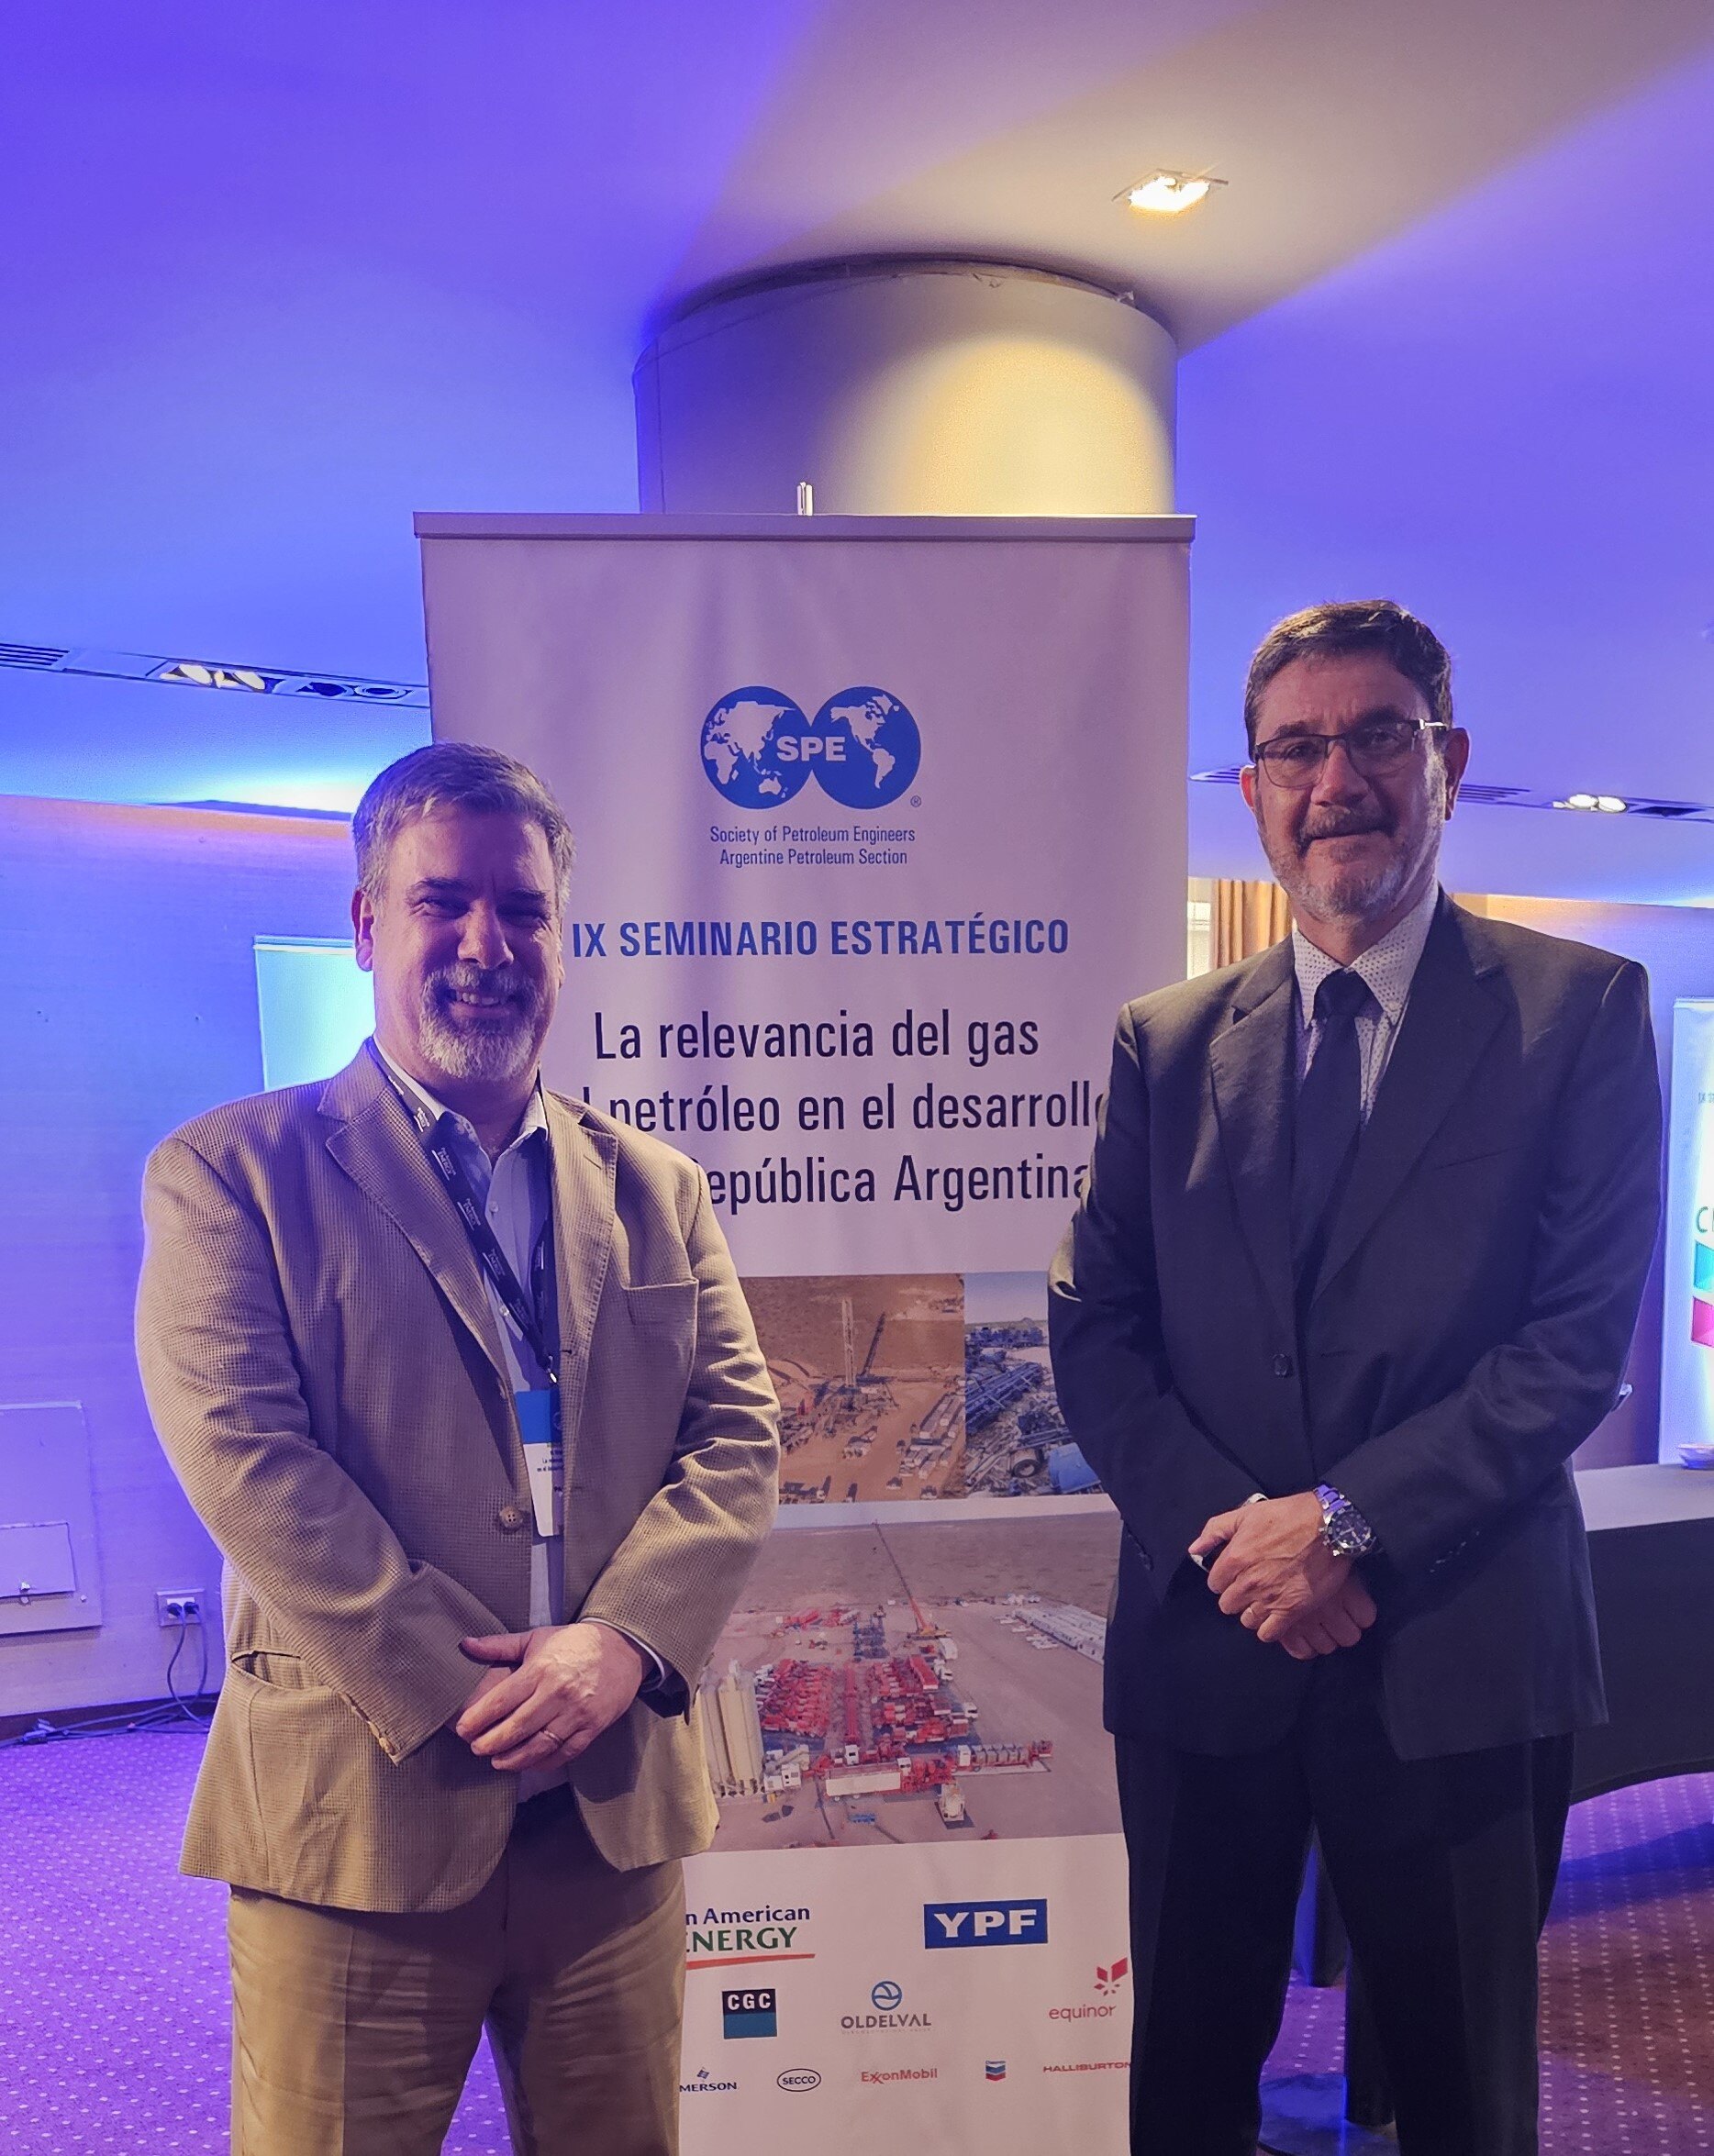 Arpel at the SPE Seminar on the relevance of Oil & Gas in the development of Argentina